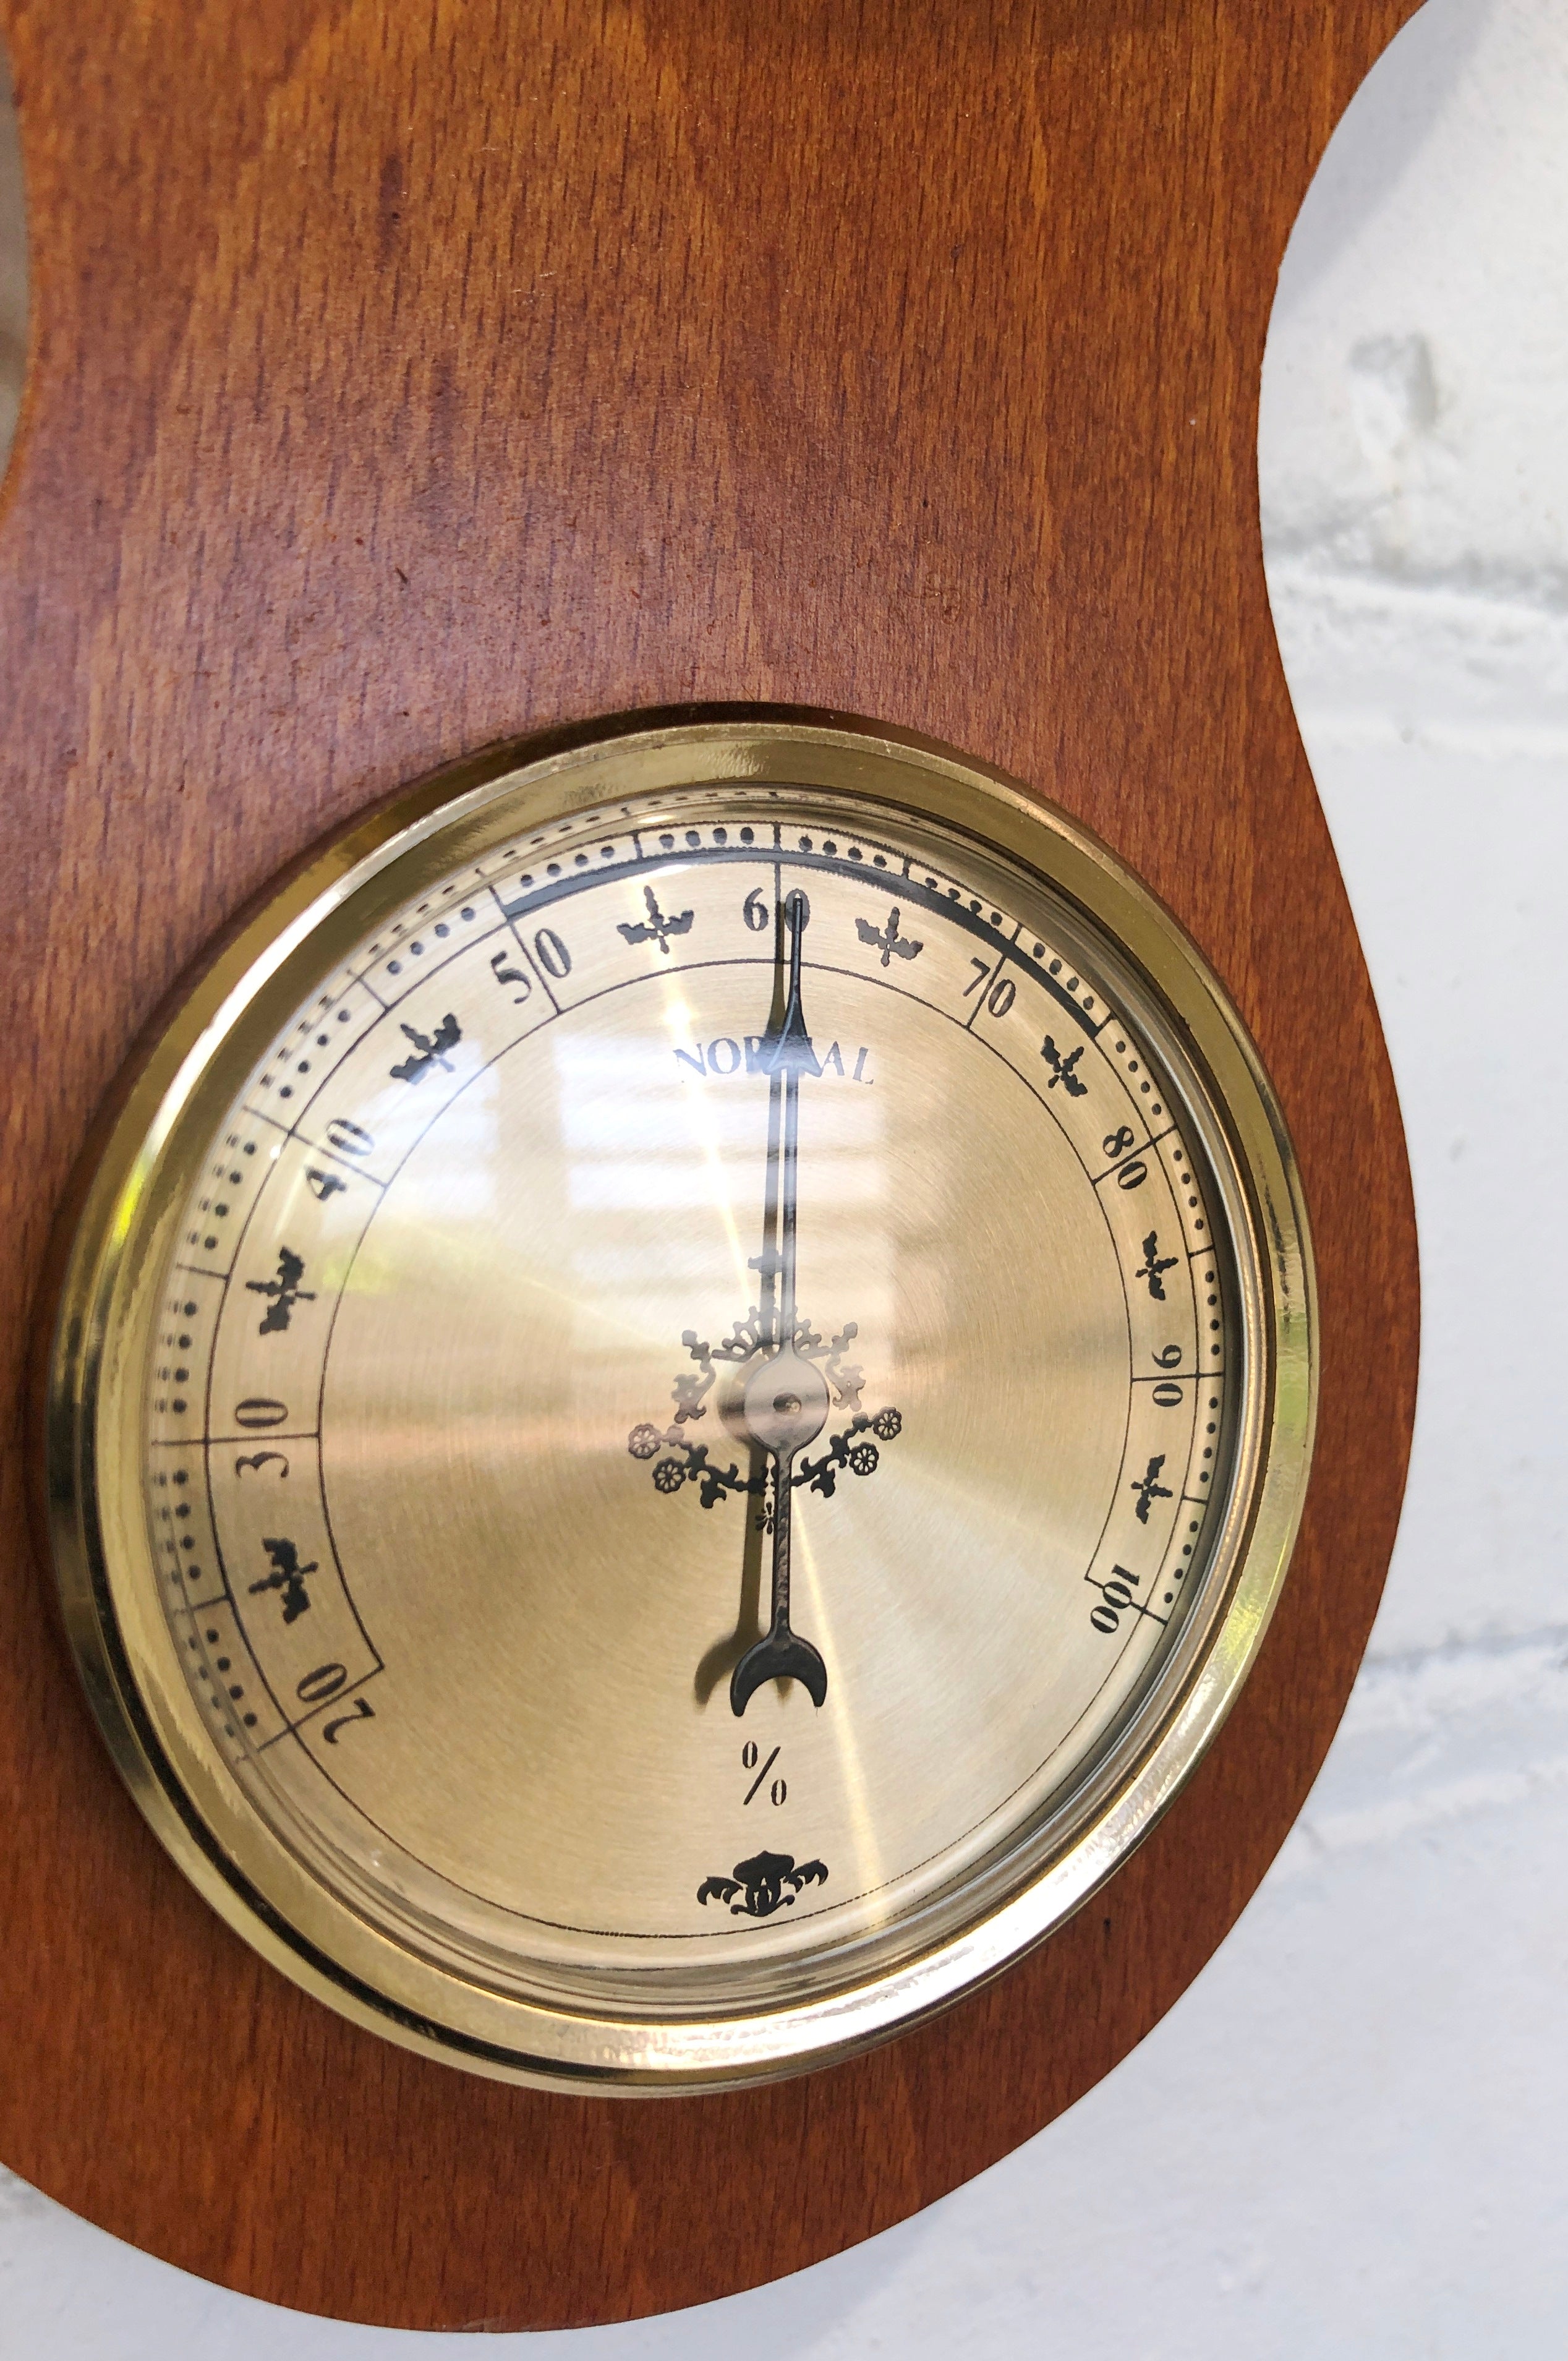 Vintage Wall Banjo Style Barometer & Thermometer | eXibit collection